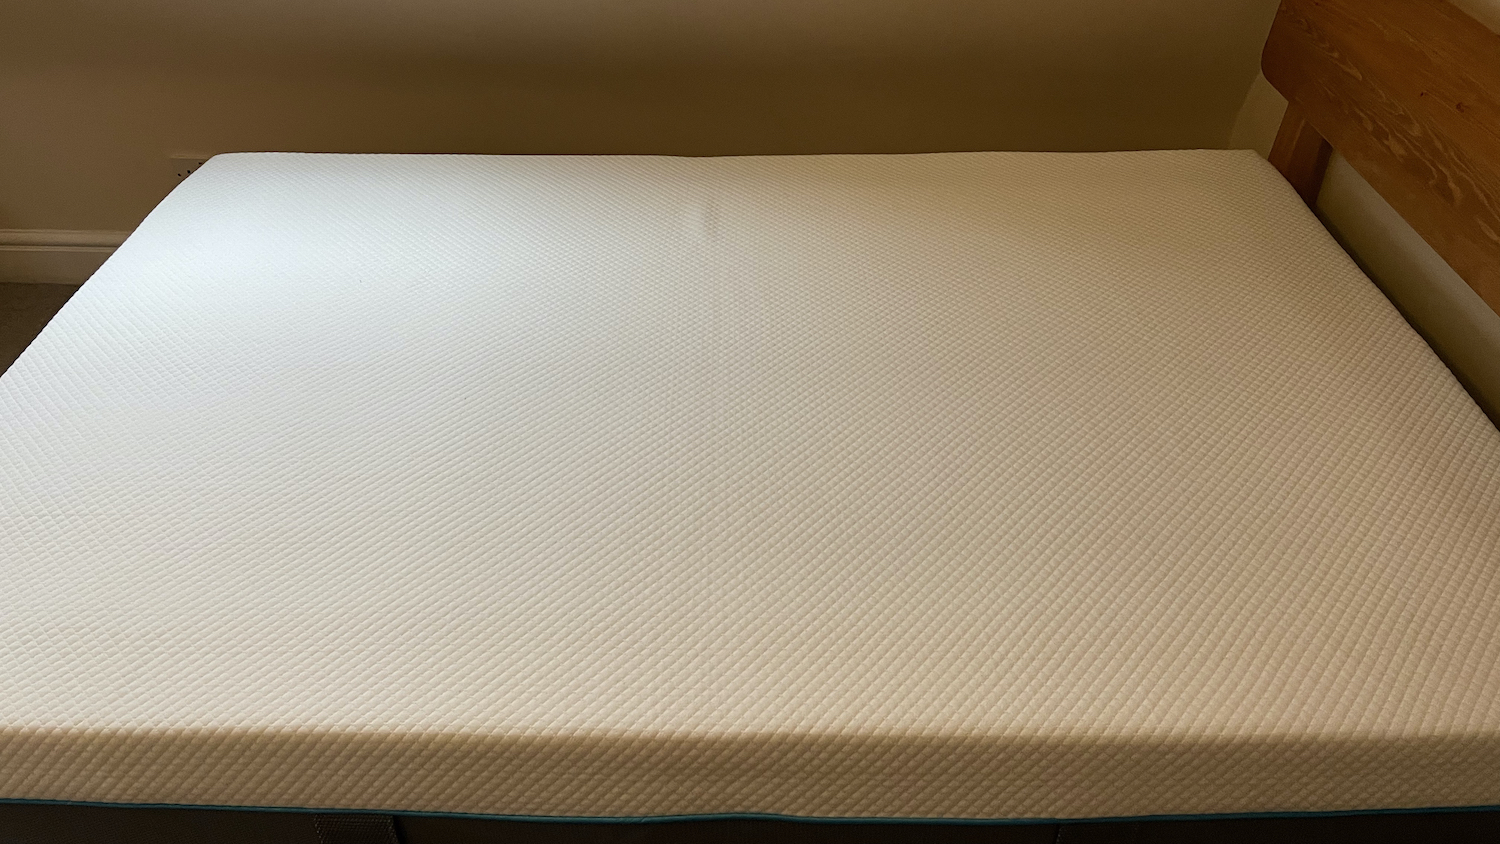 The Simba Hybrid Mattress photographed from the side in our reviewer's bedroom